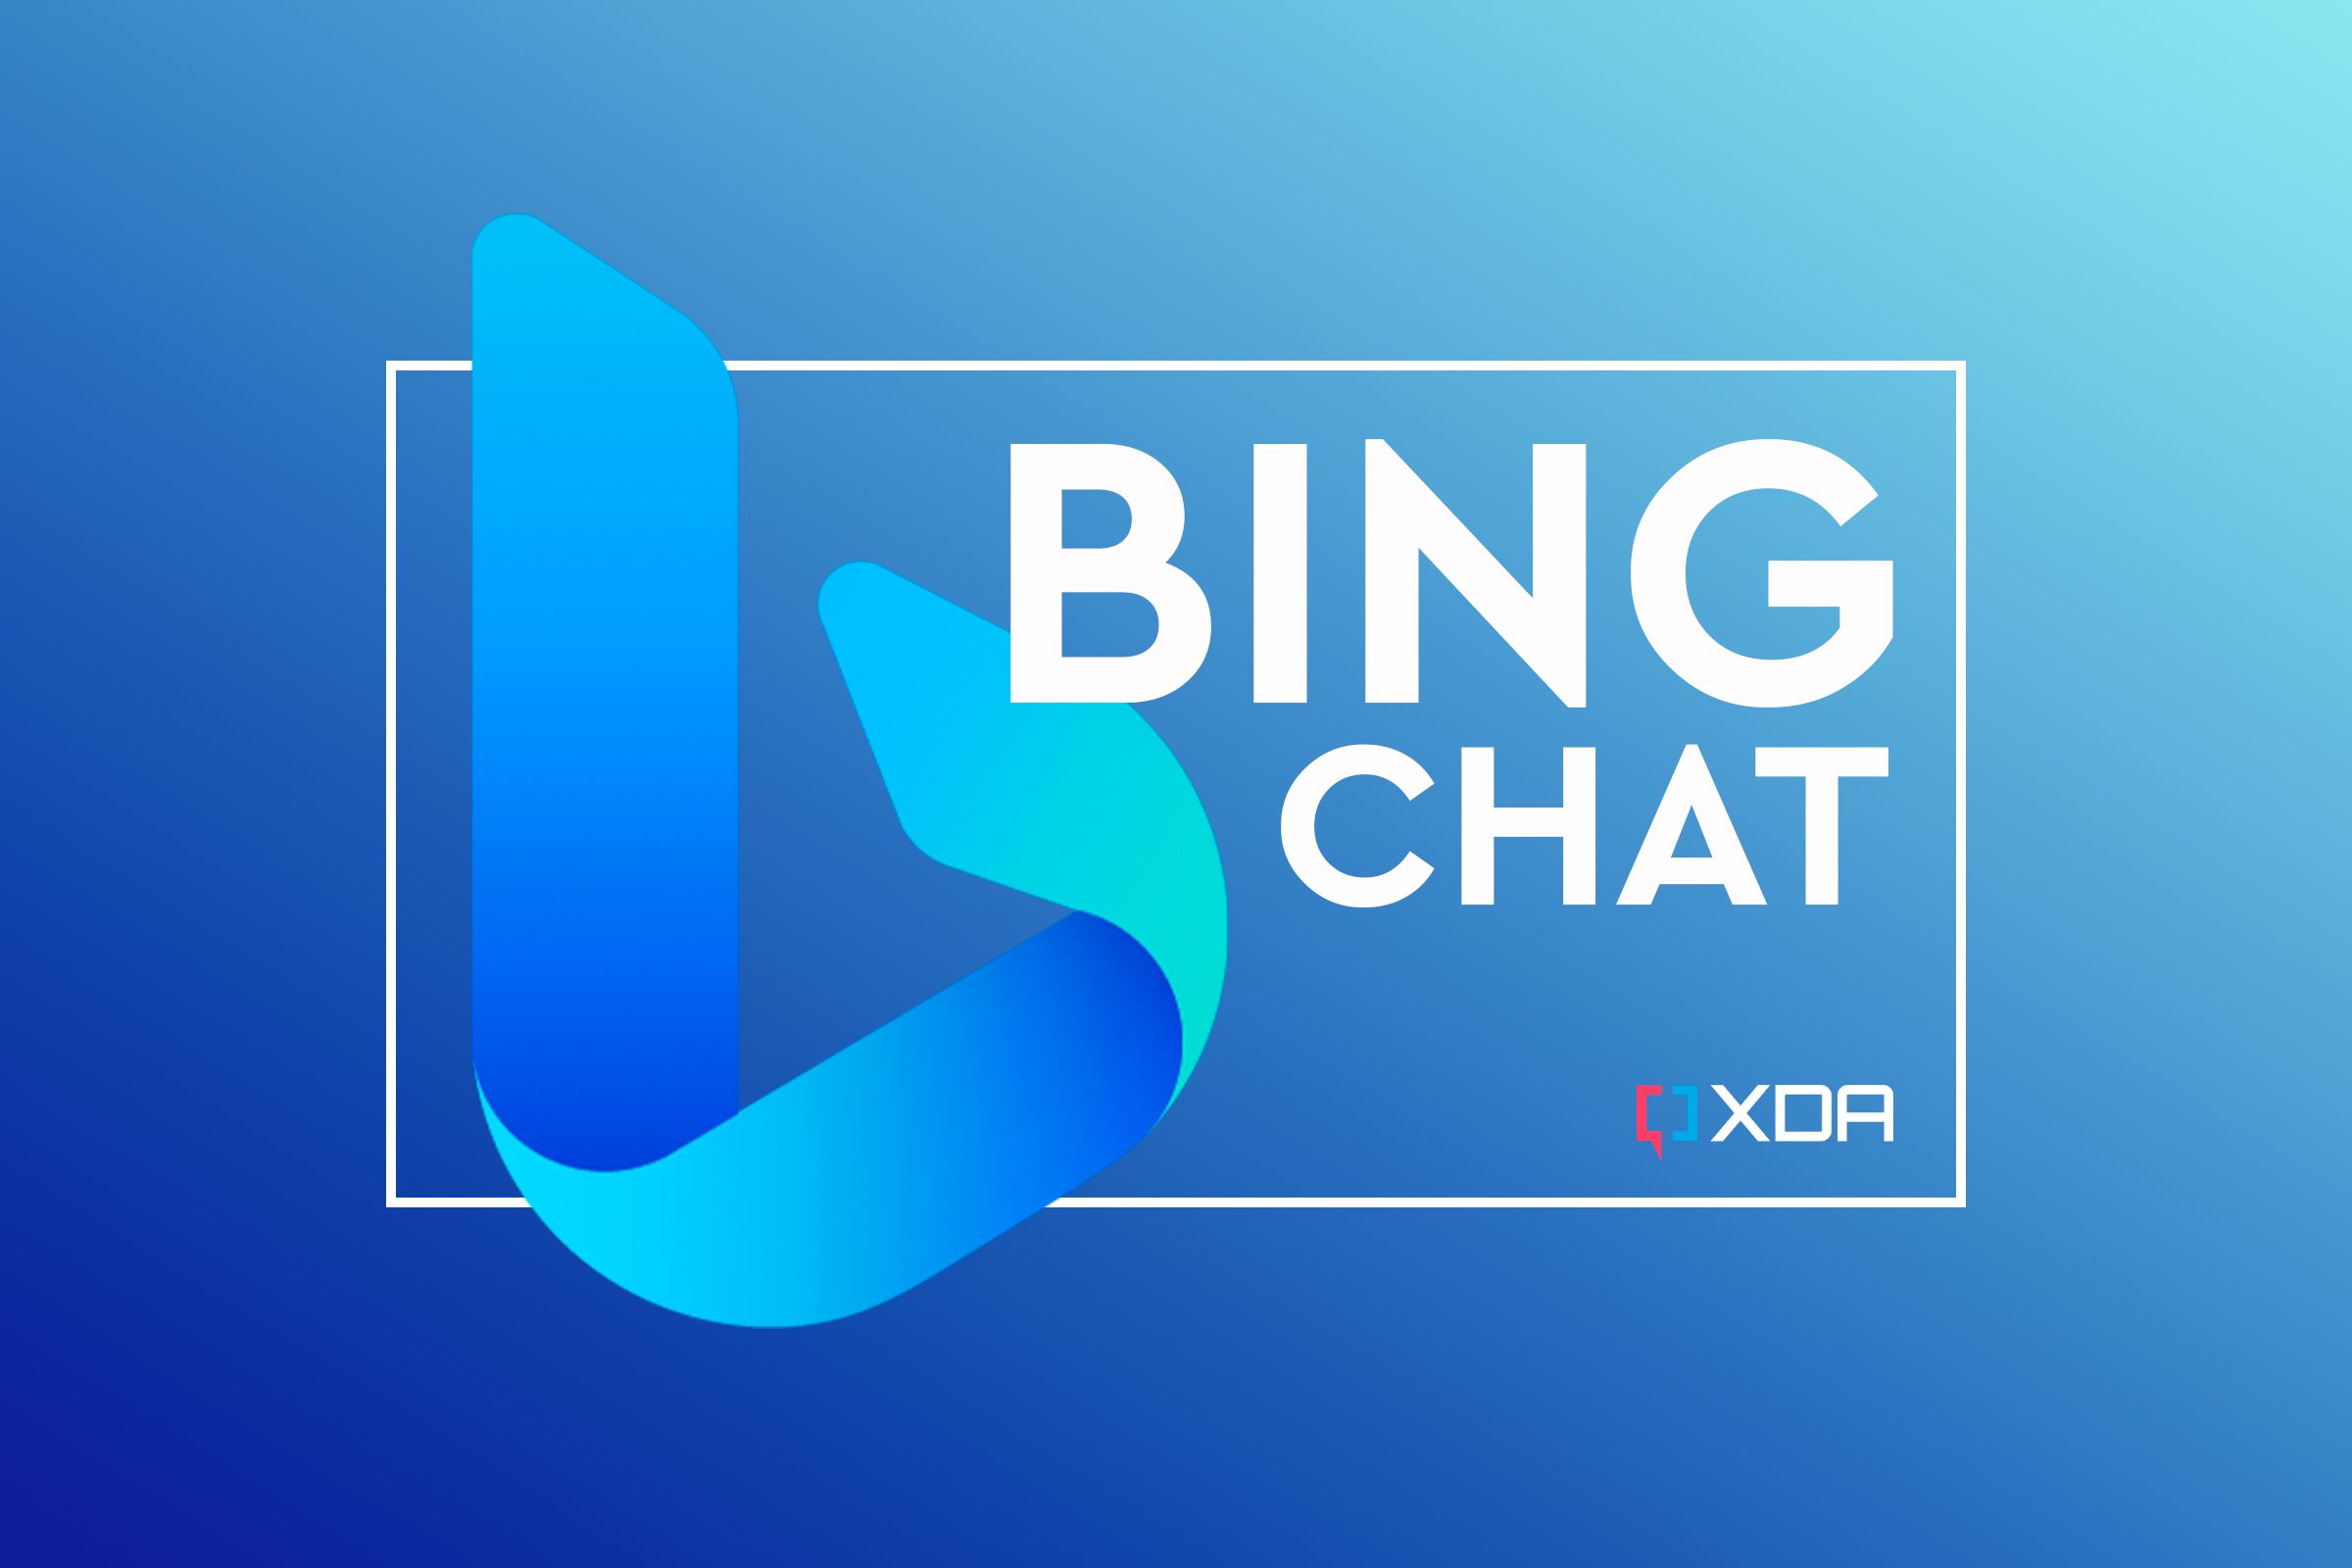 Bing Chat will make it easier to continue chatting on your phone